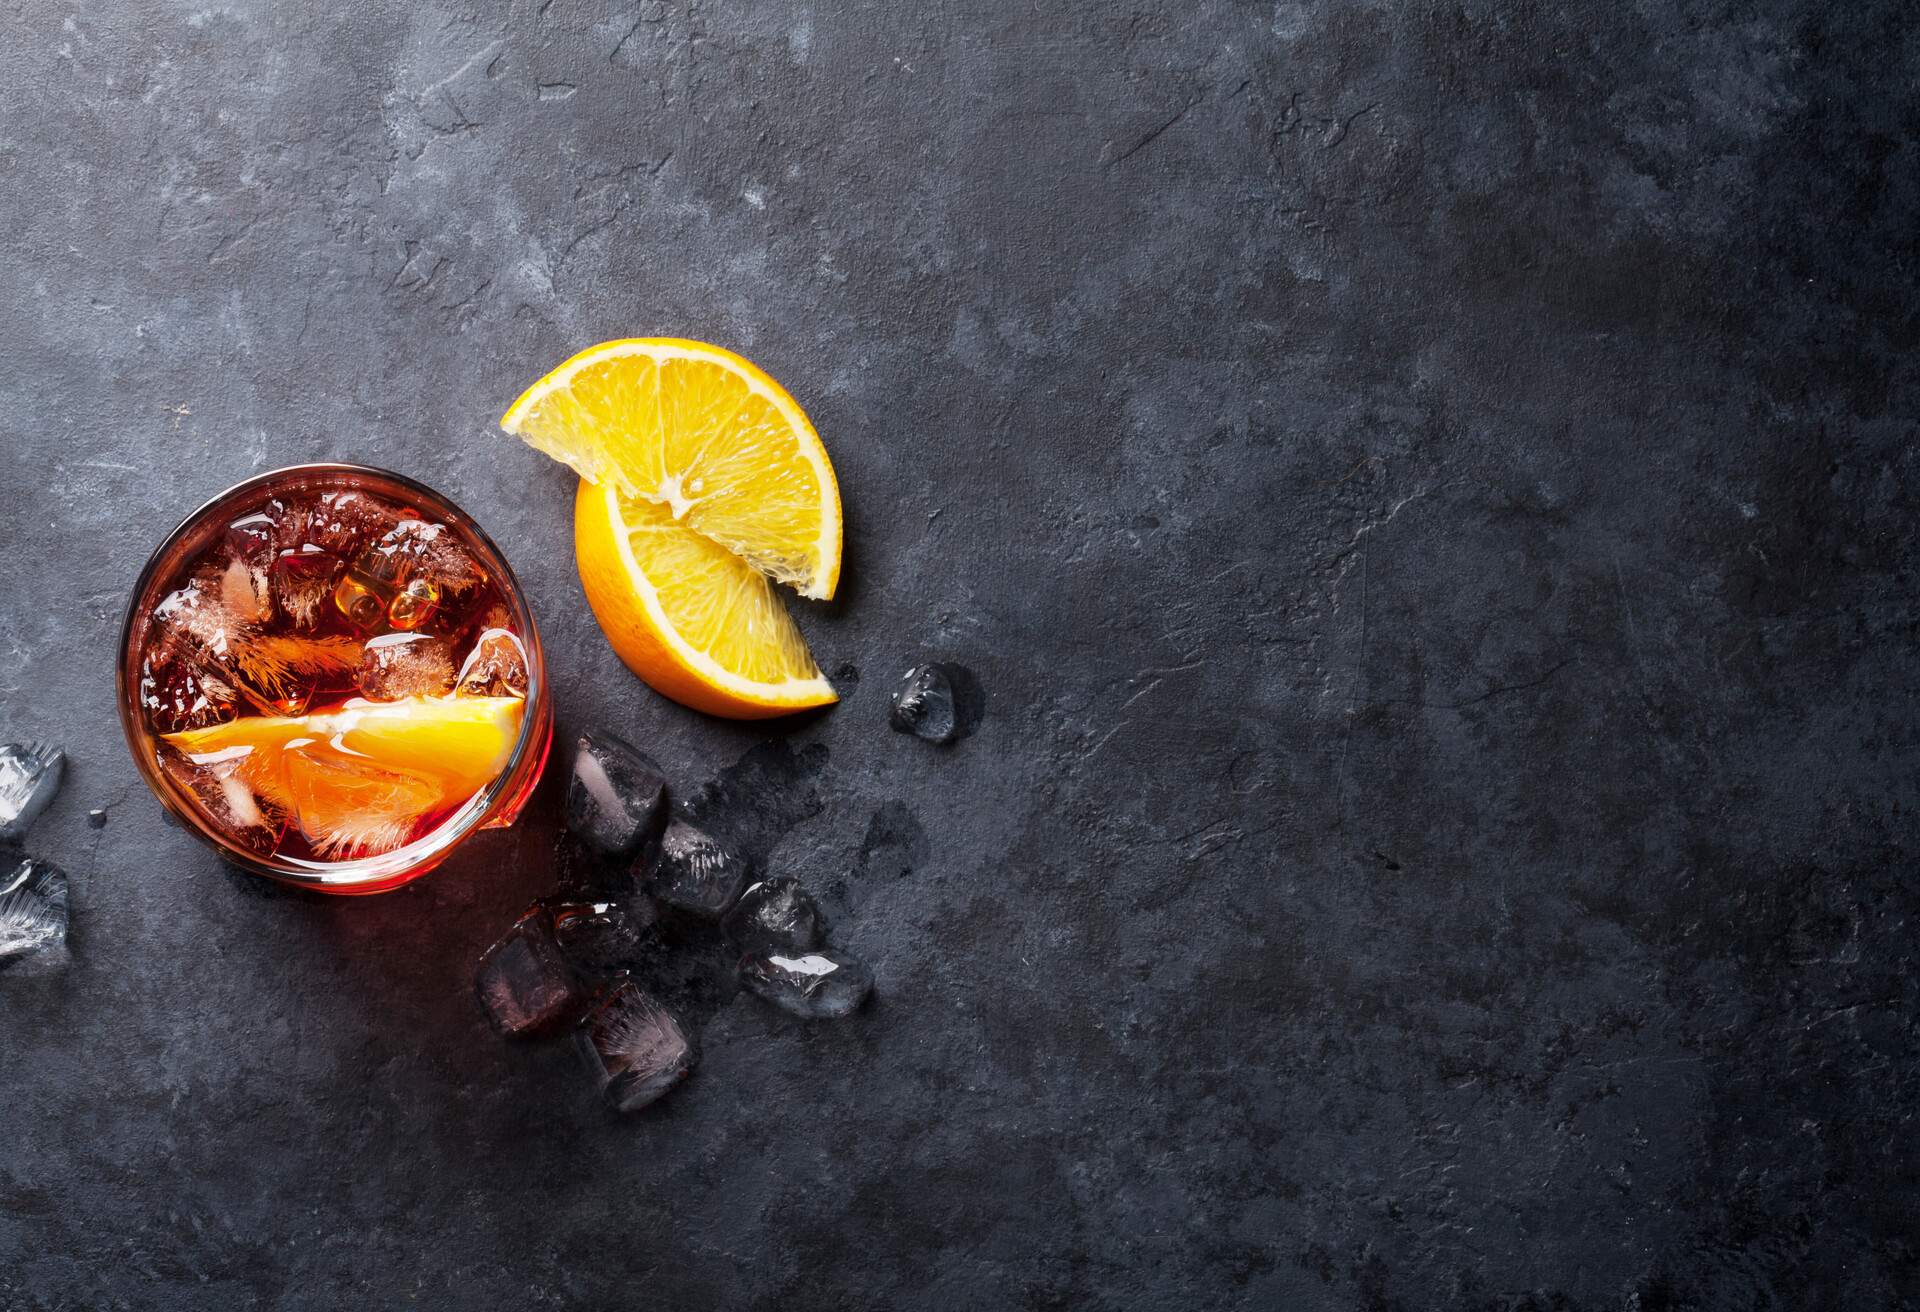 A glass of ice-cold negroni with orange wedges on a black table.